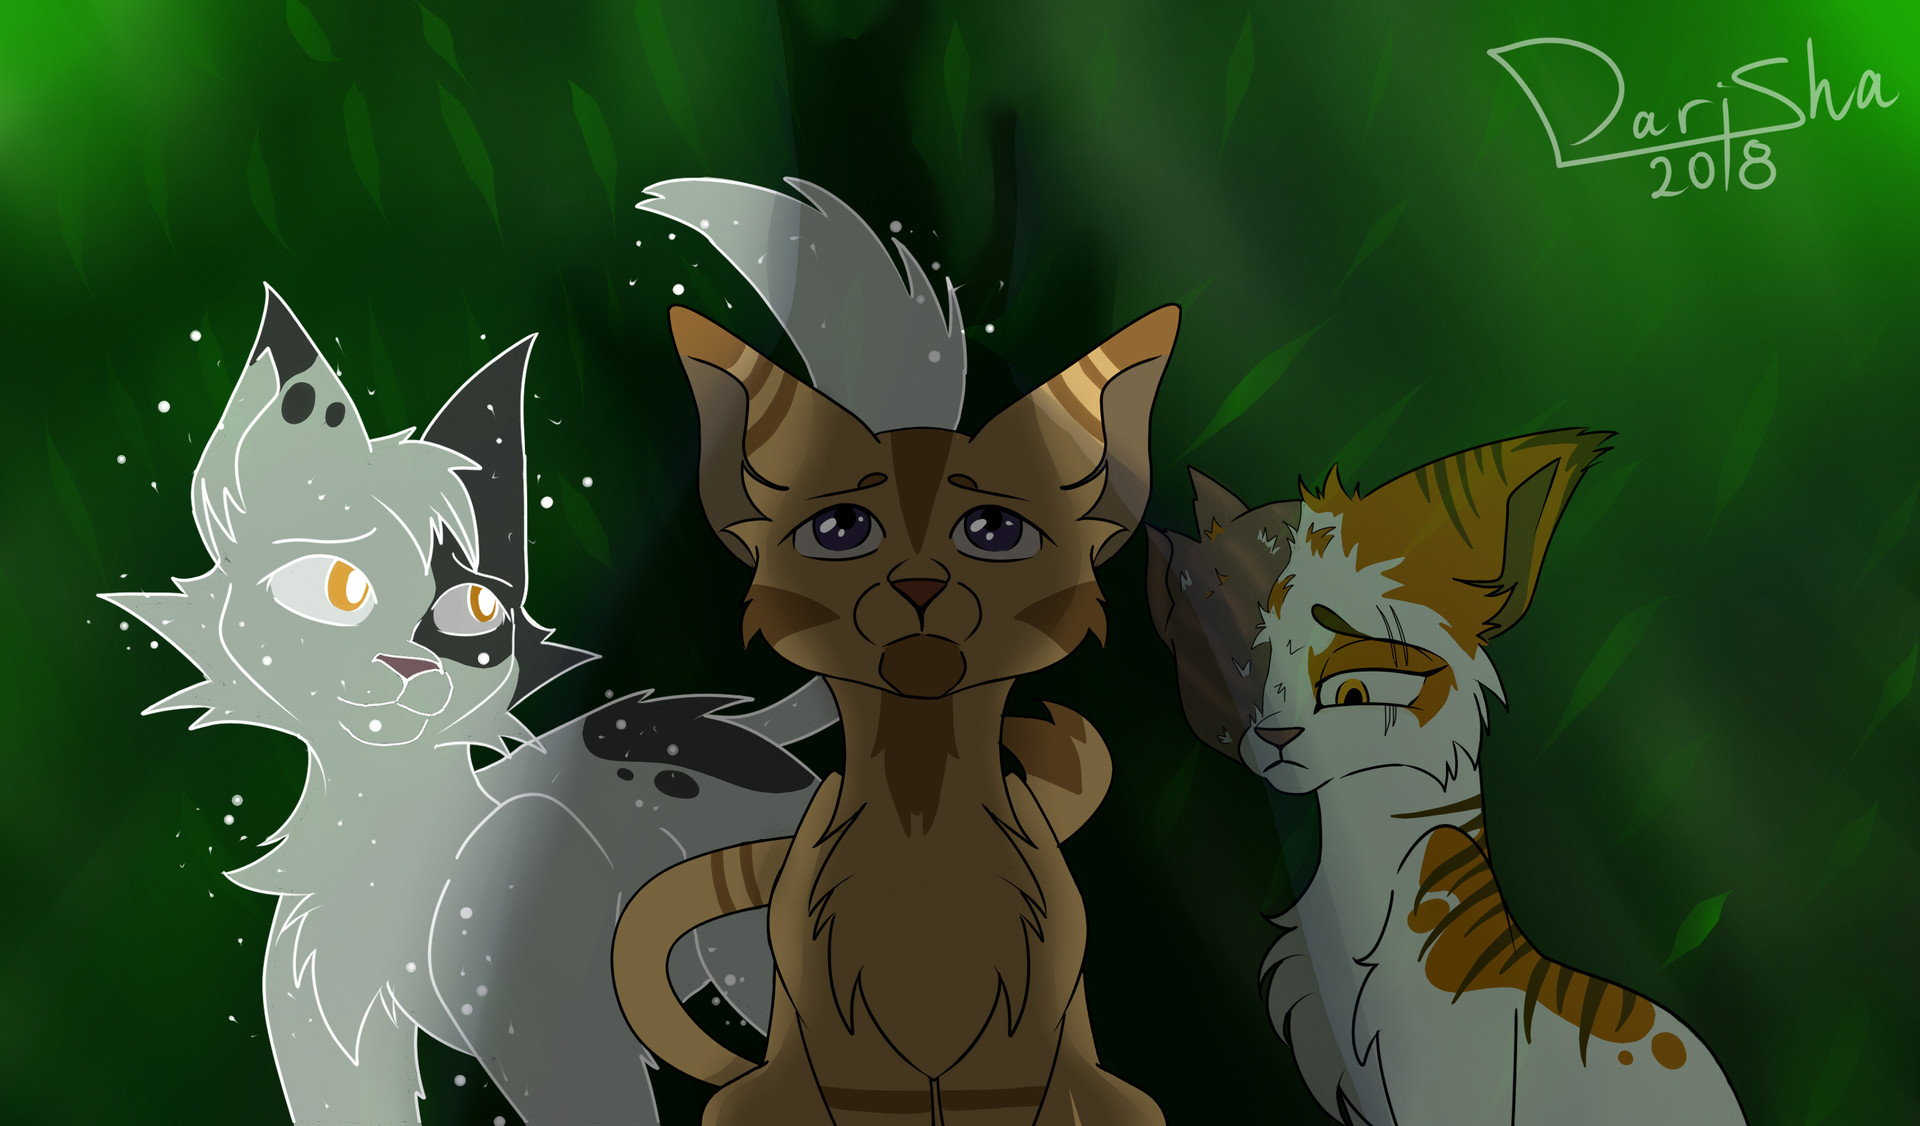 Thornpaw, Brightheart and Swiftpaw